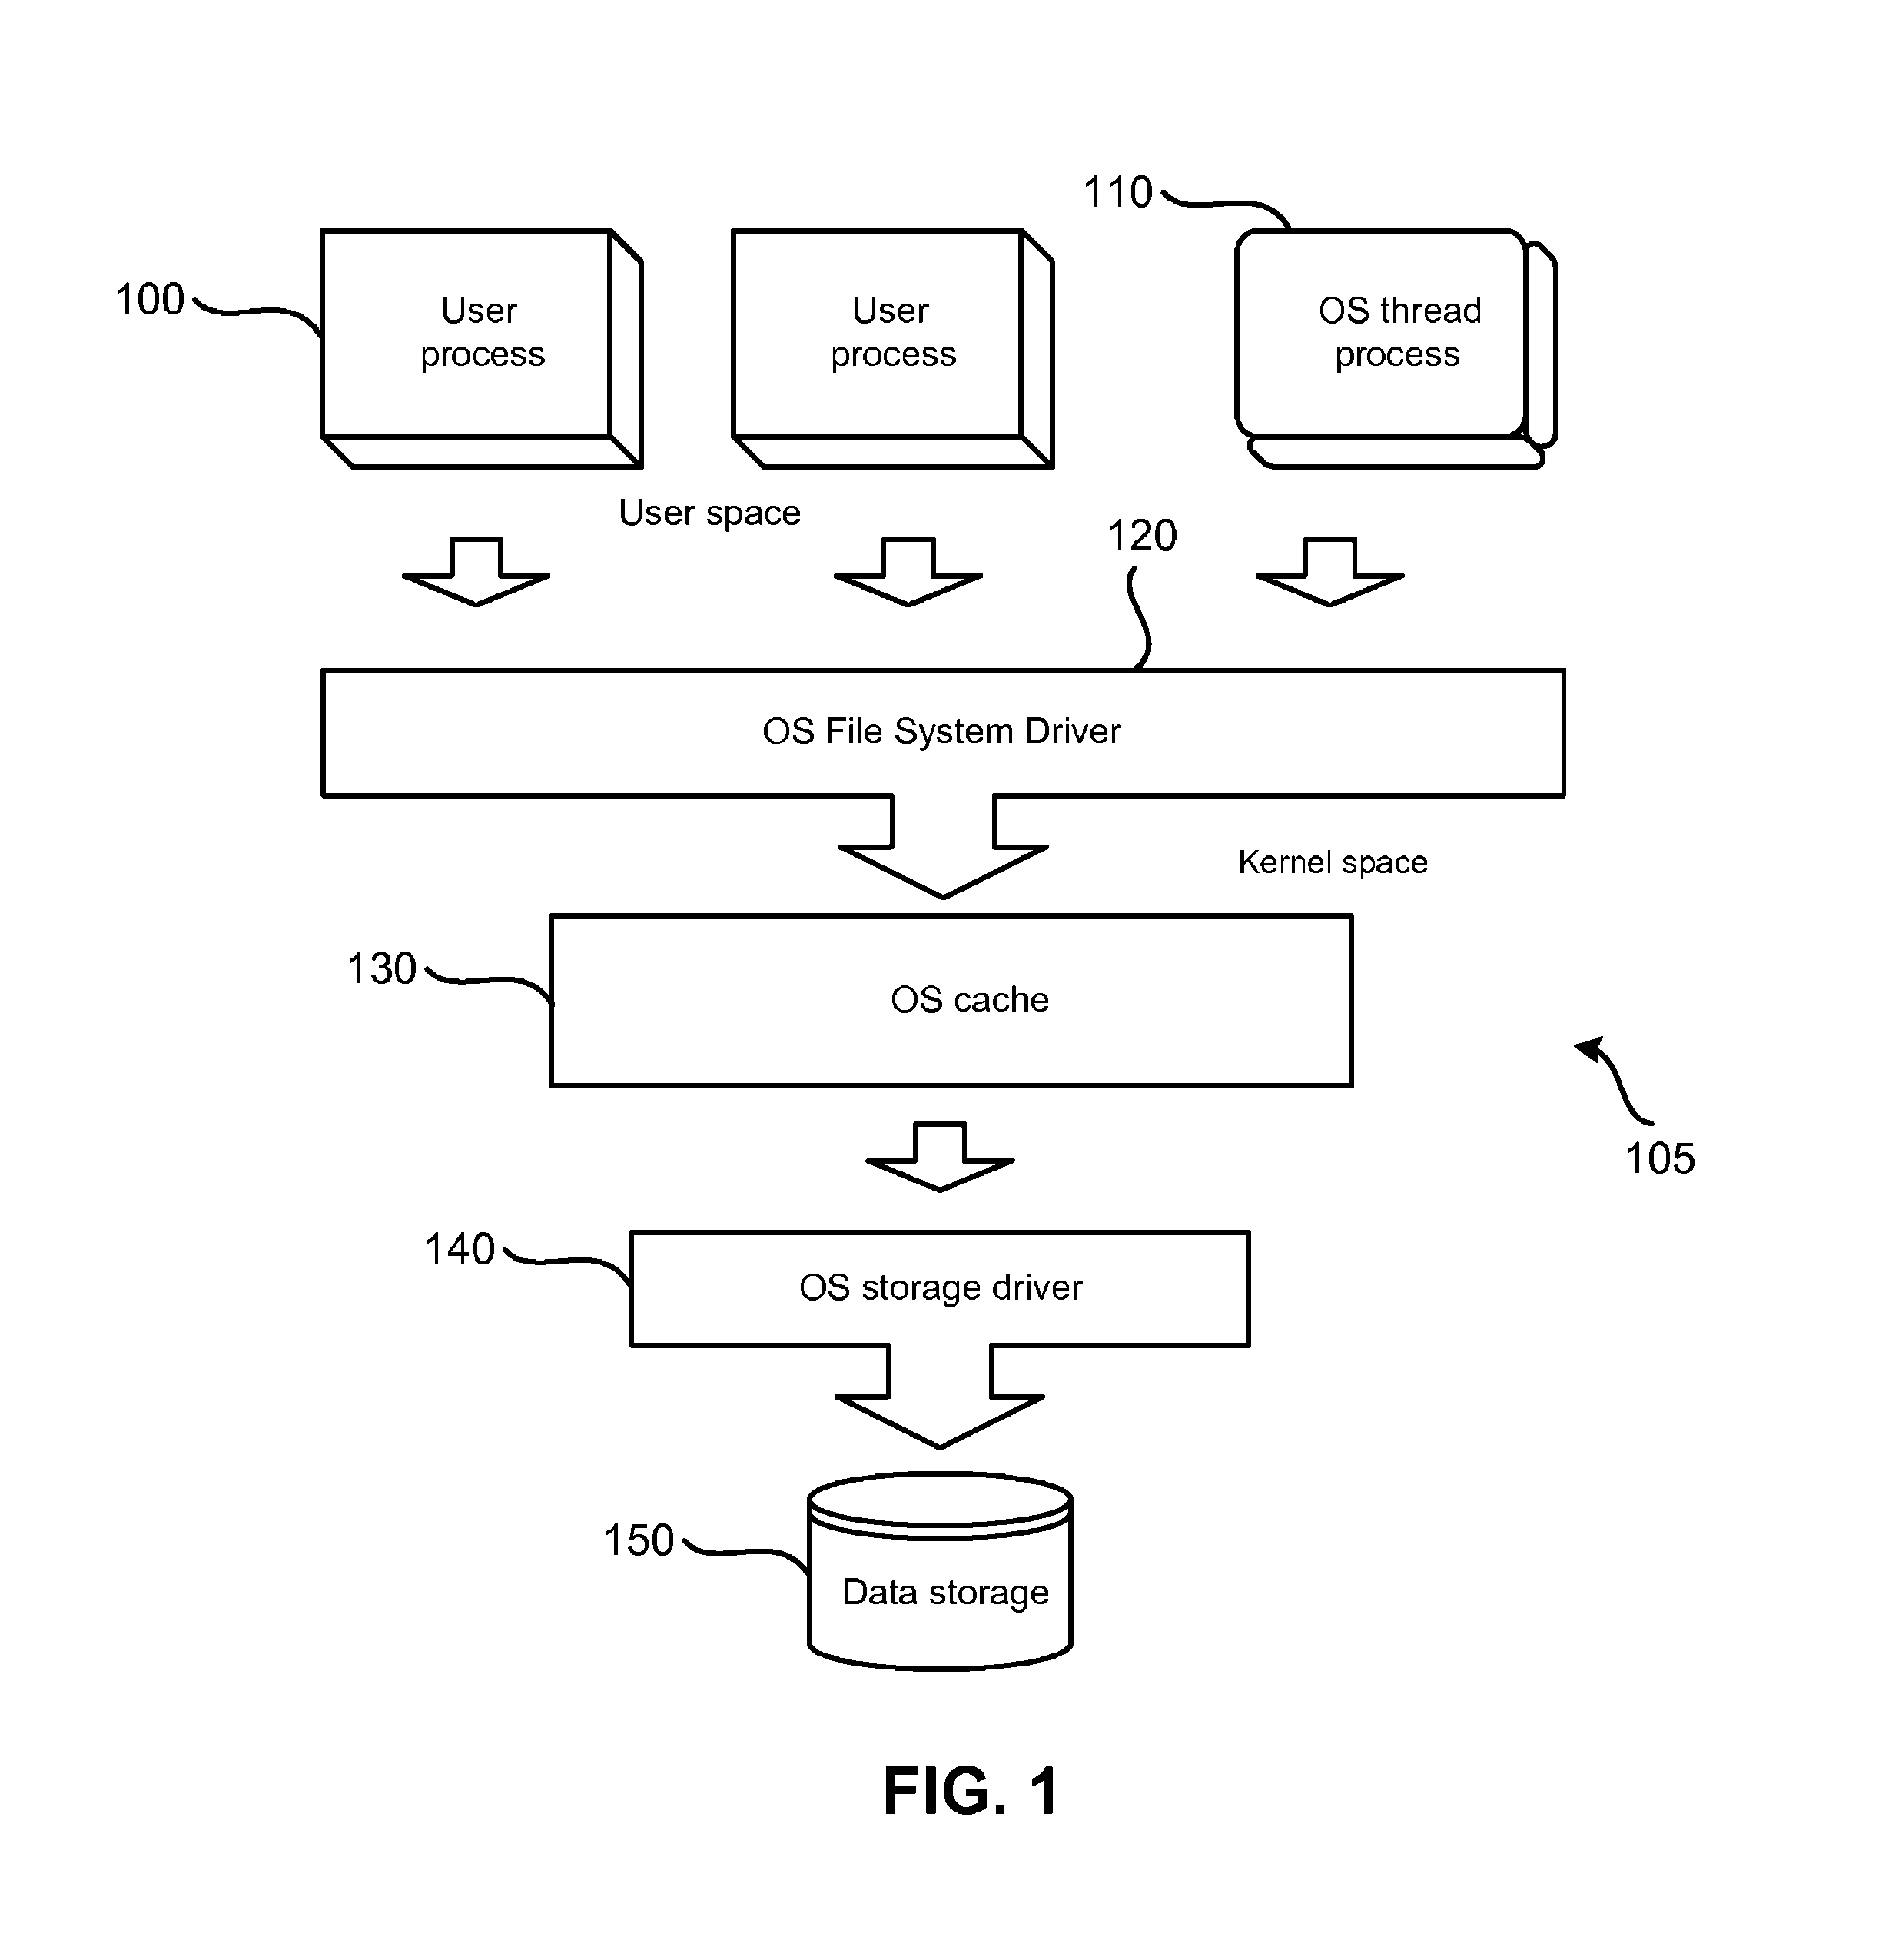 Method and system for continuous data protection